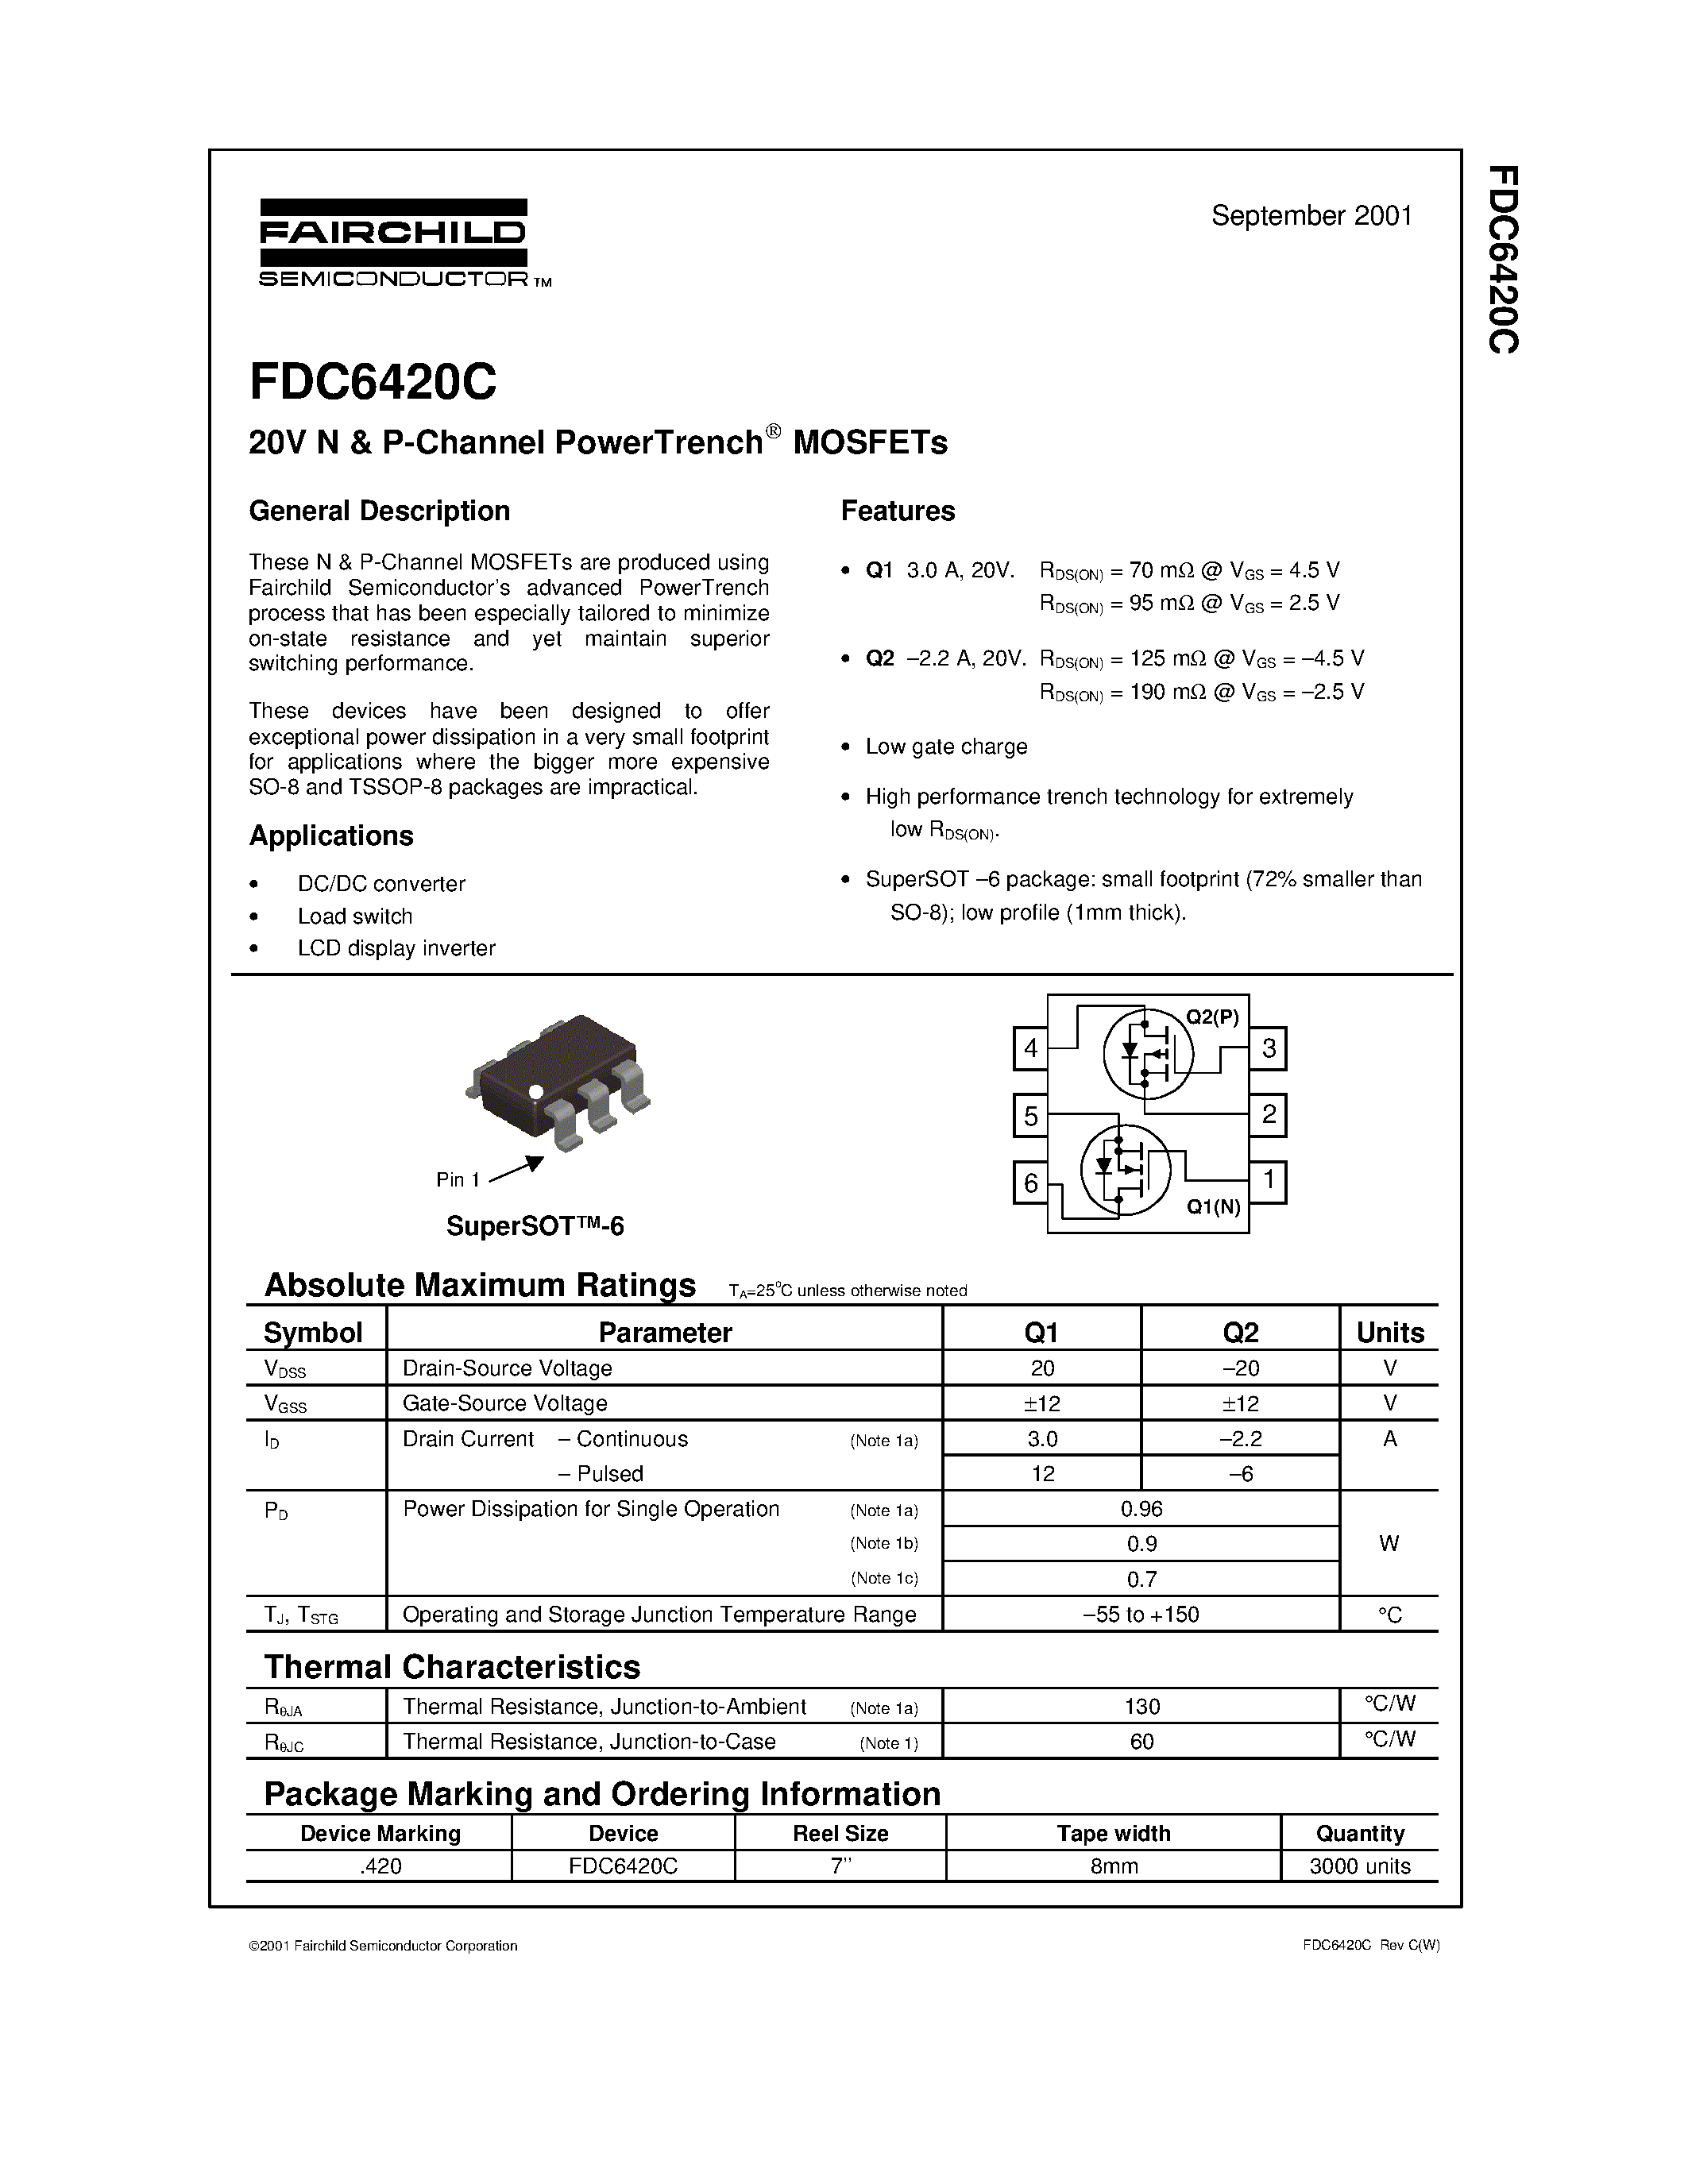 Datasheet FDC6420C - 20V N & P-Channel PowerTrench MOSFETs page 1